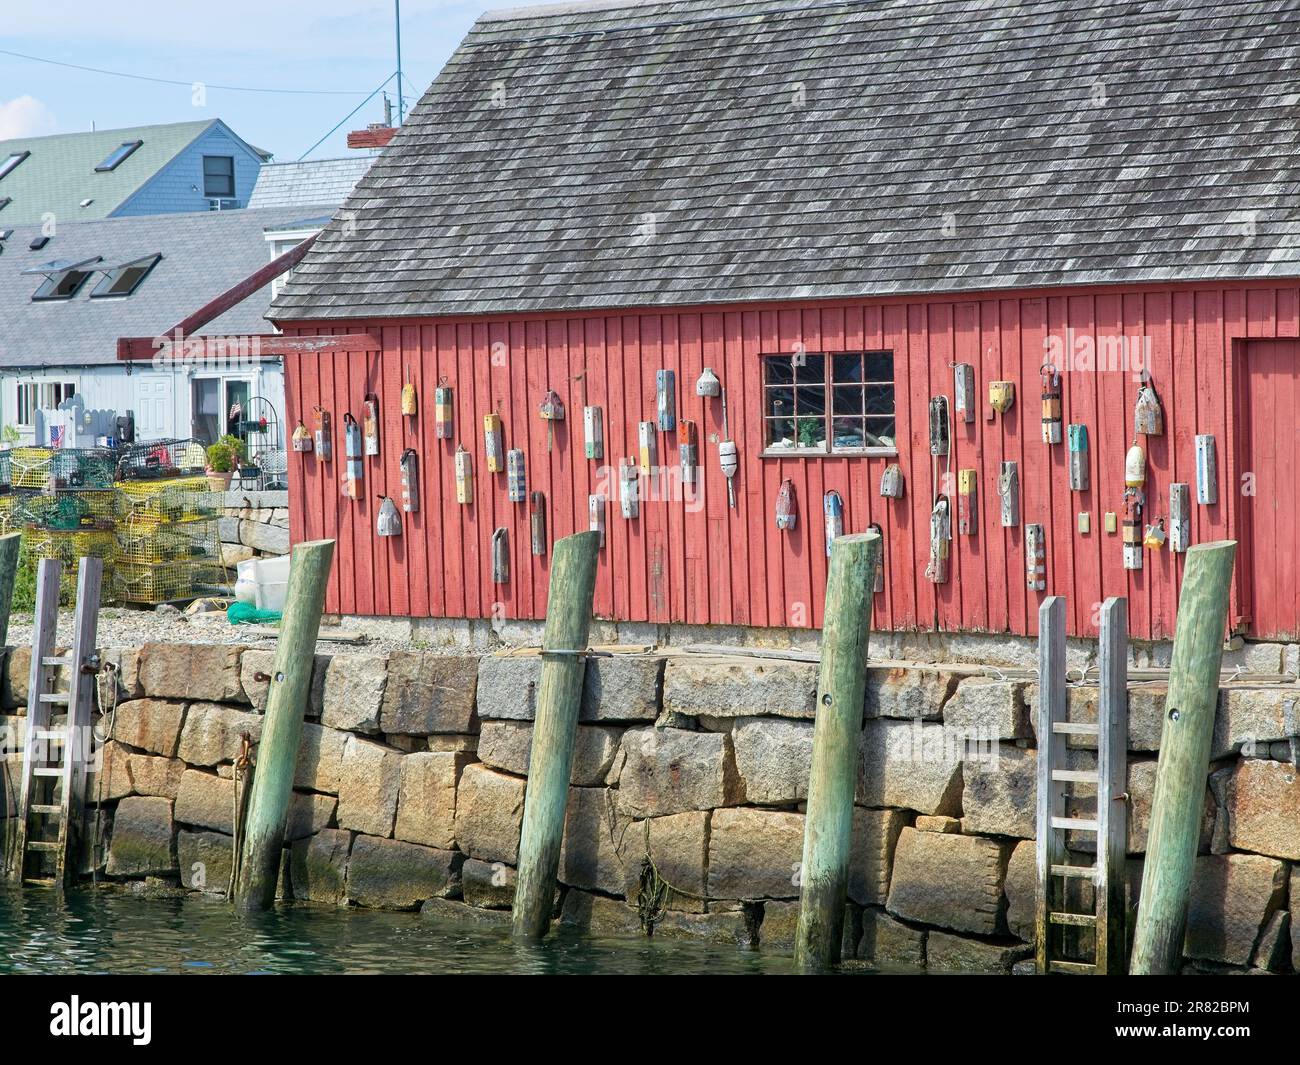 Mooring buoys hang on red board and batten wall of landmark Motif Number One fishing shack on Bradley Wharf in Rockport Massachusetts Stock Photo